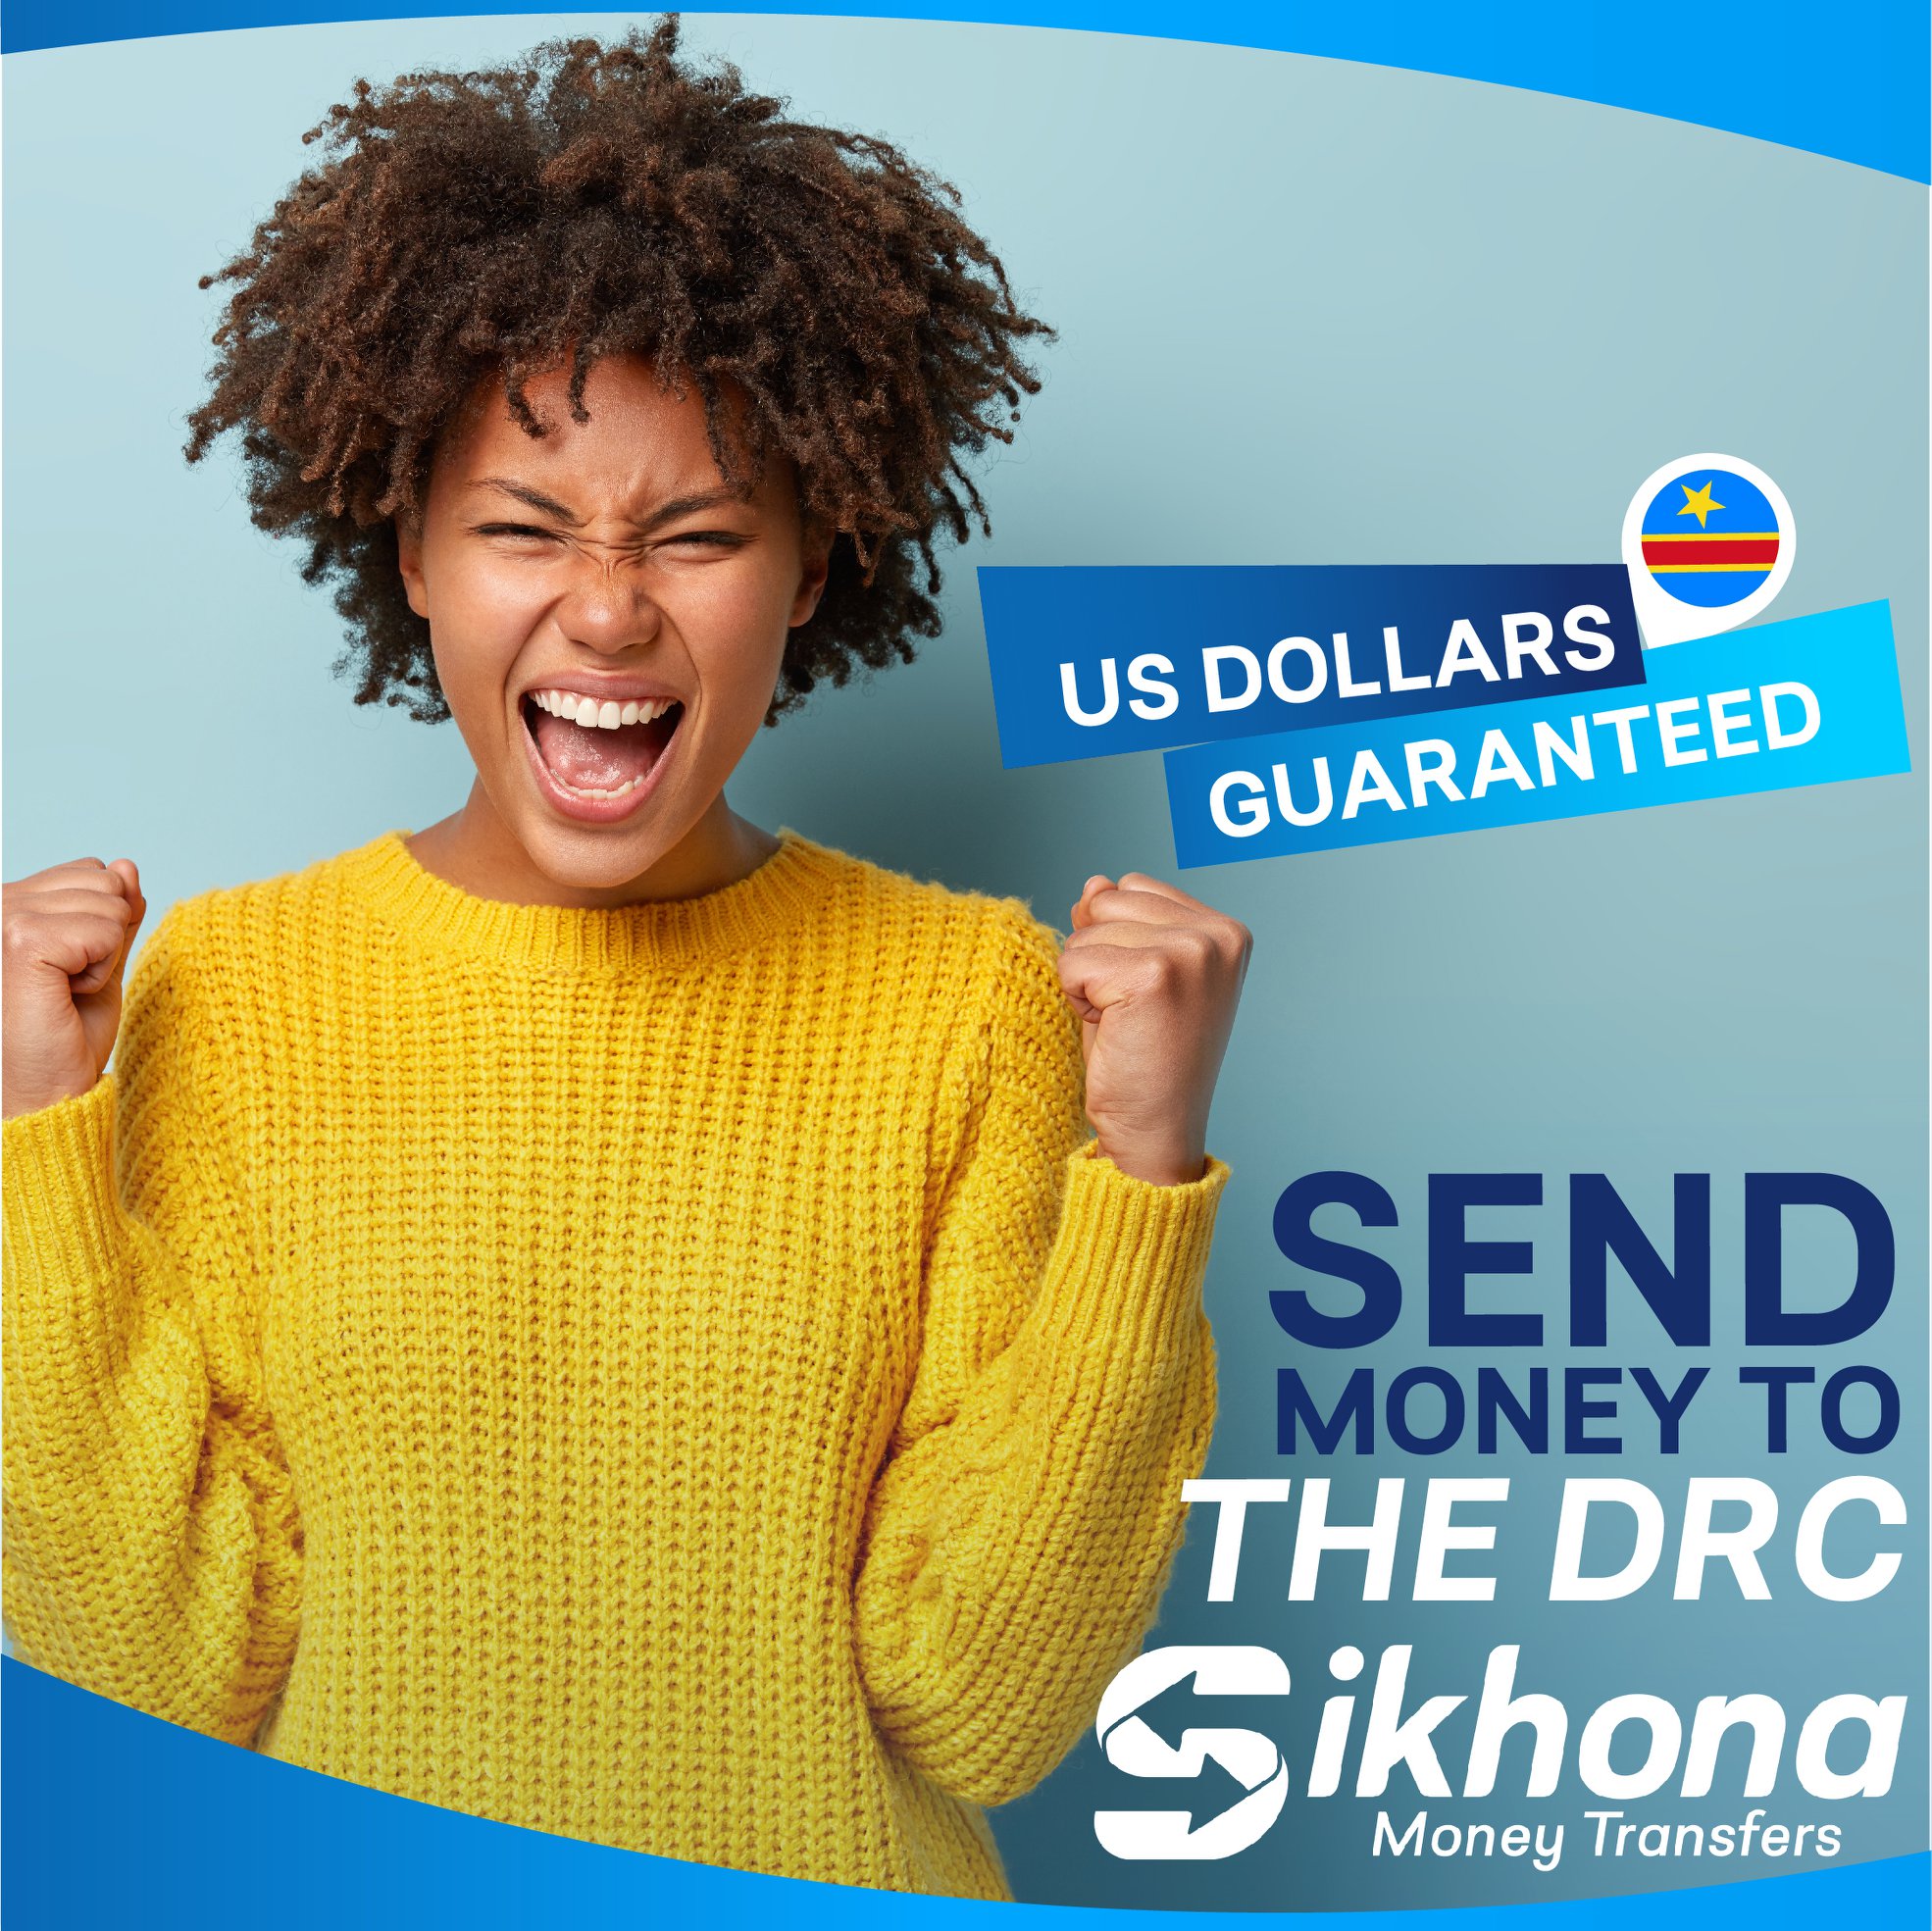 Send and Receive money from South Africa to USA